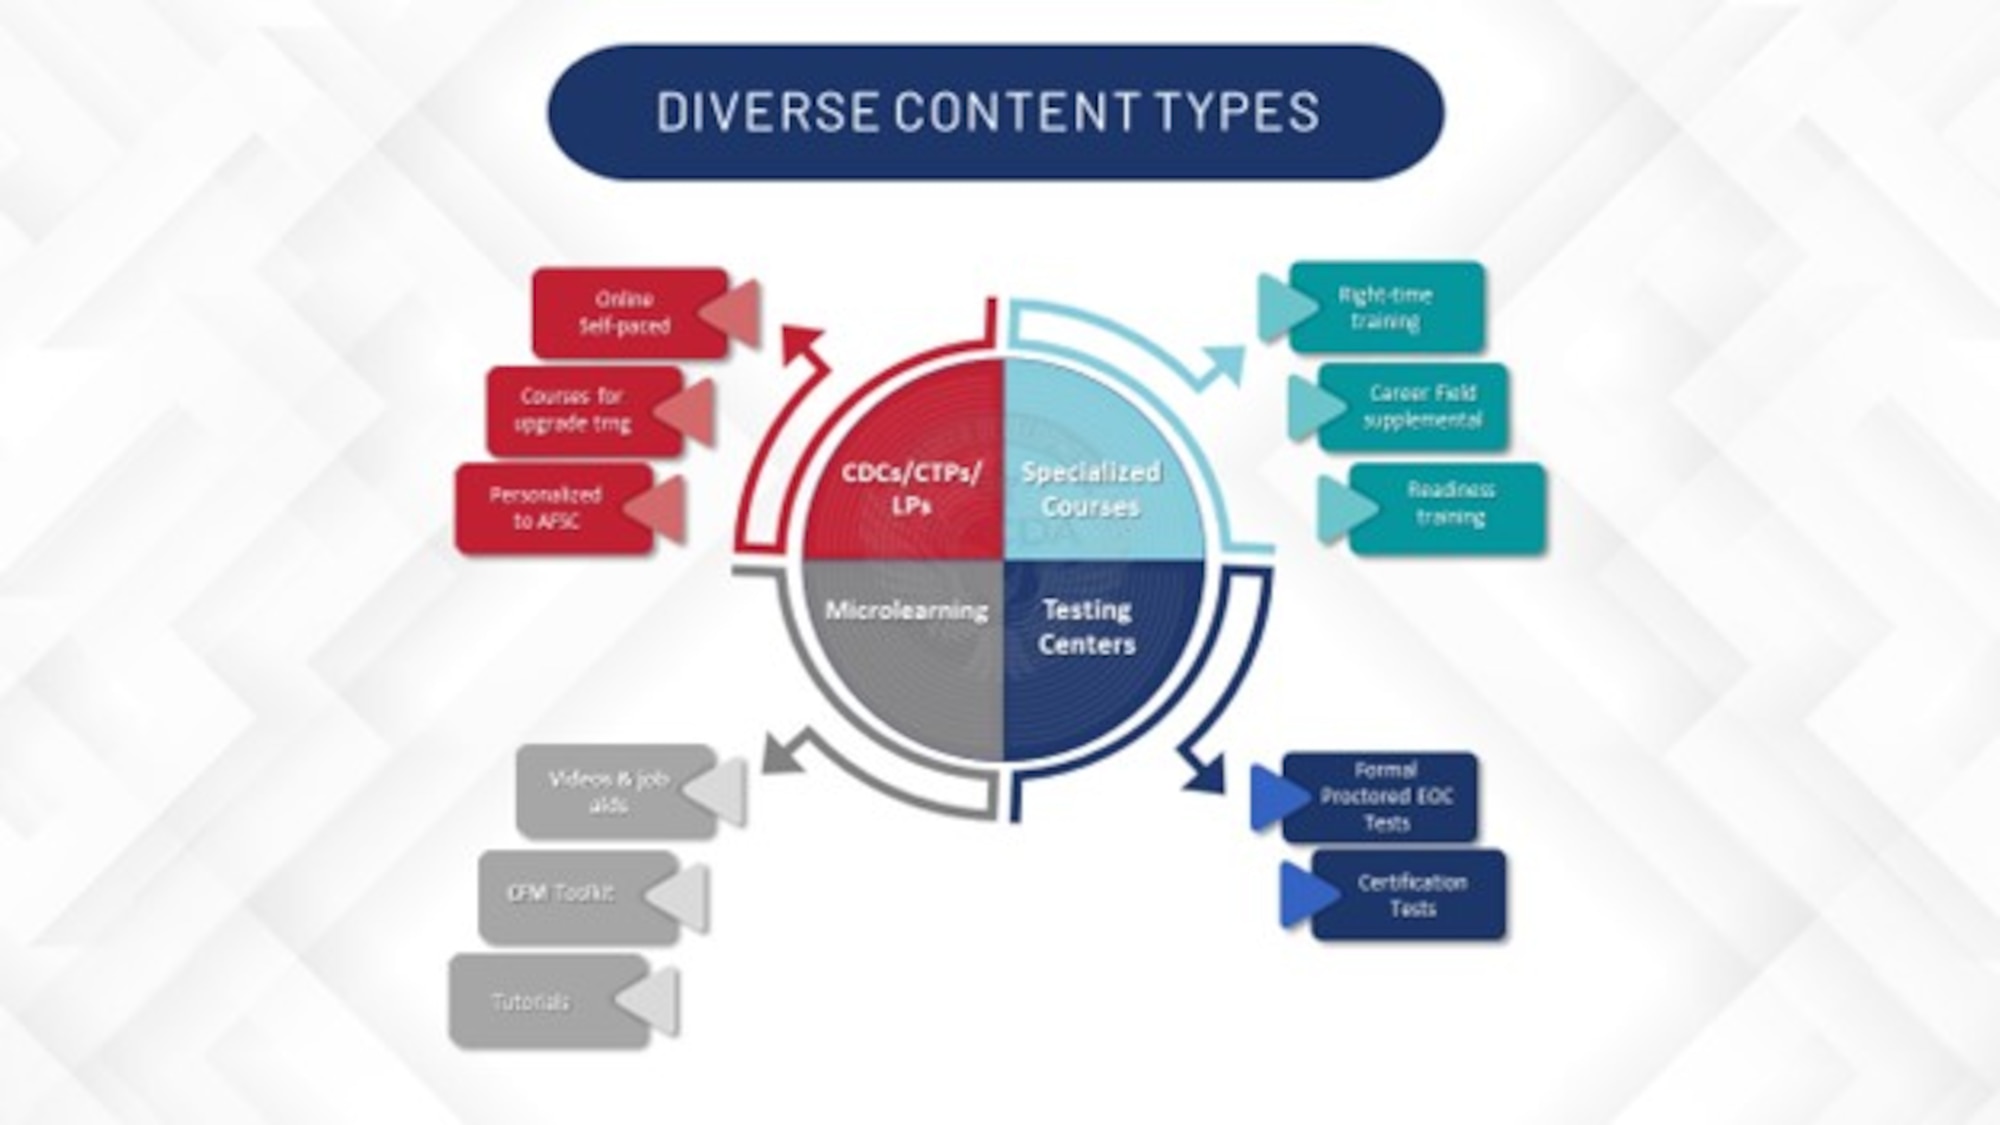 Courtesy graphic provided by the U.S. Air Force Career Development Academy to depict the diverse content types it produces.